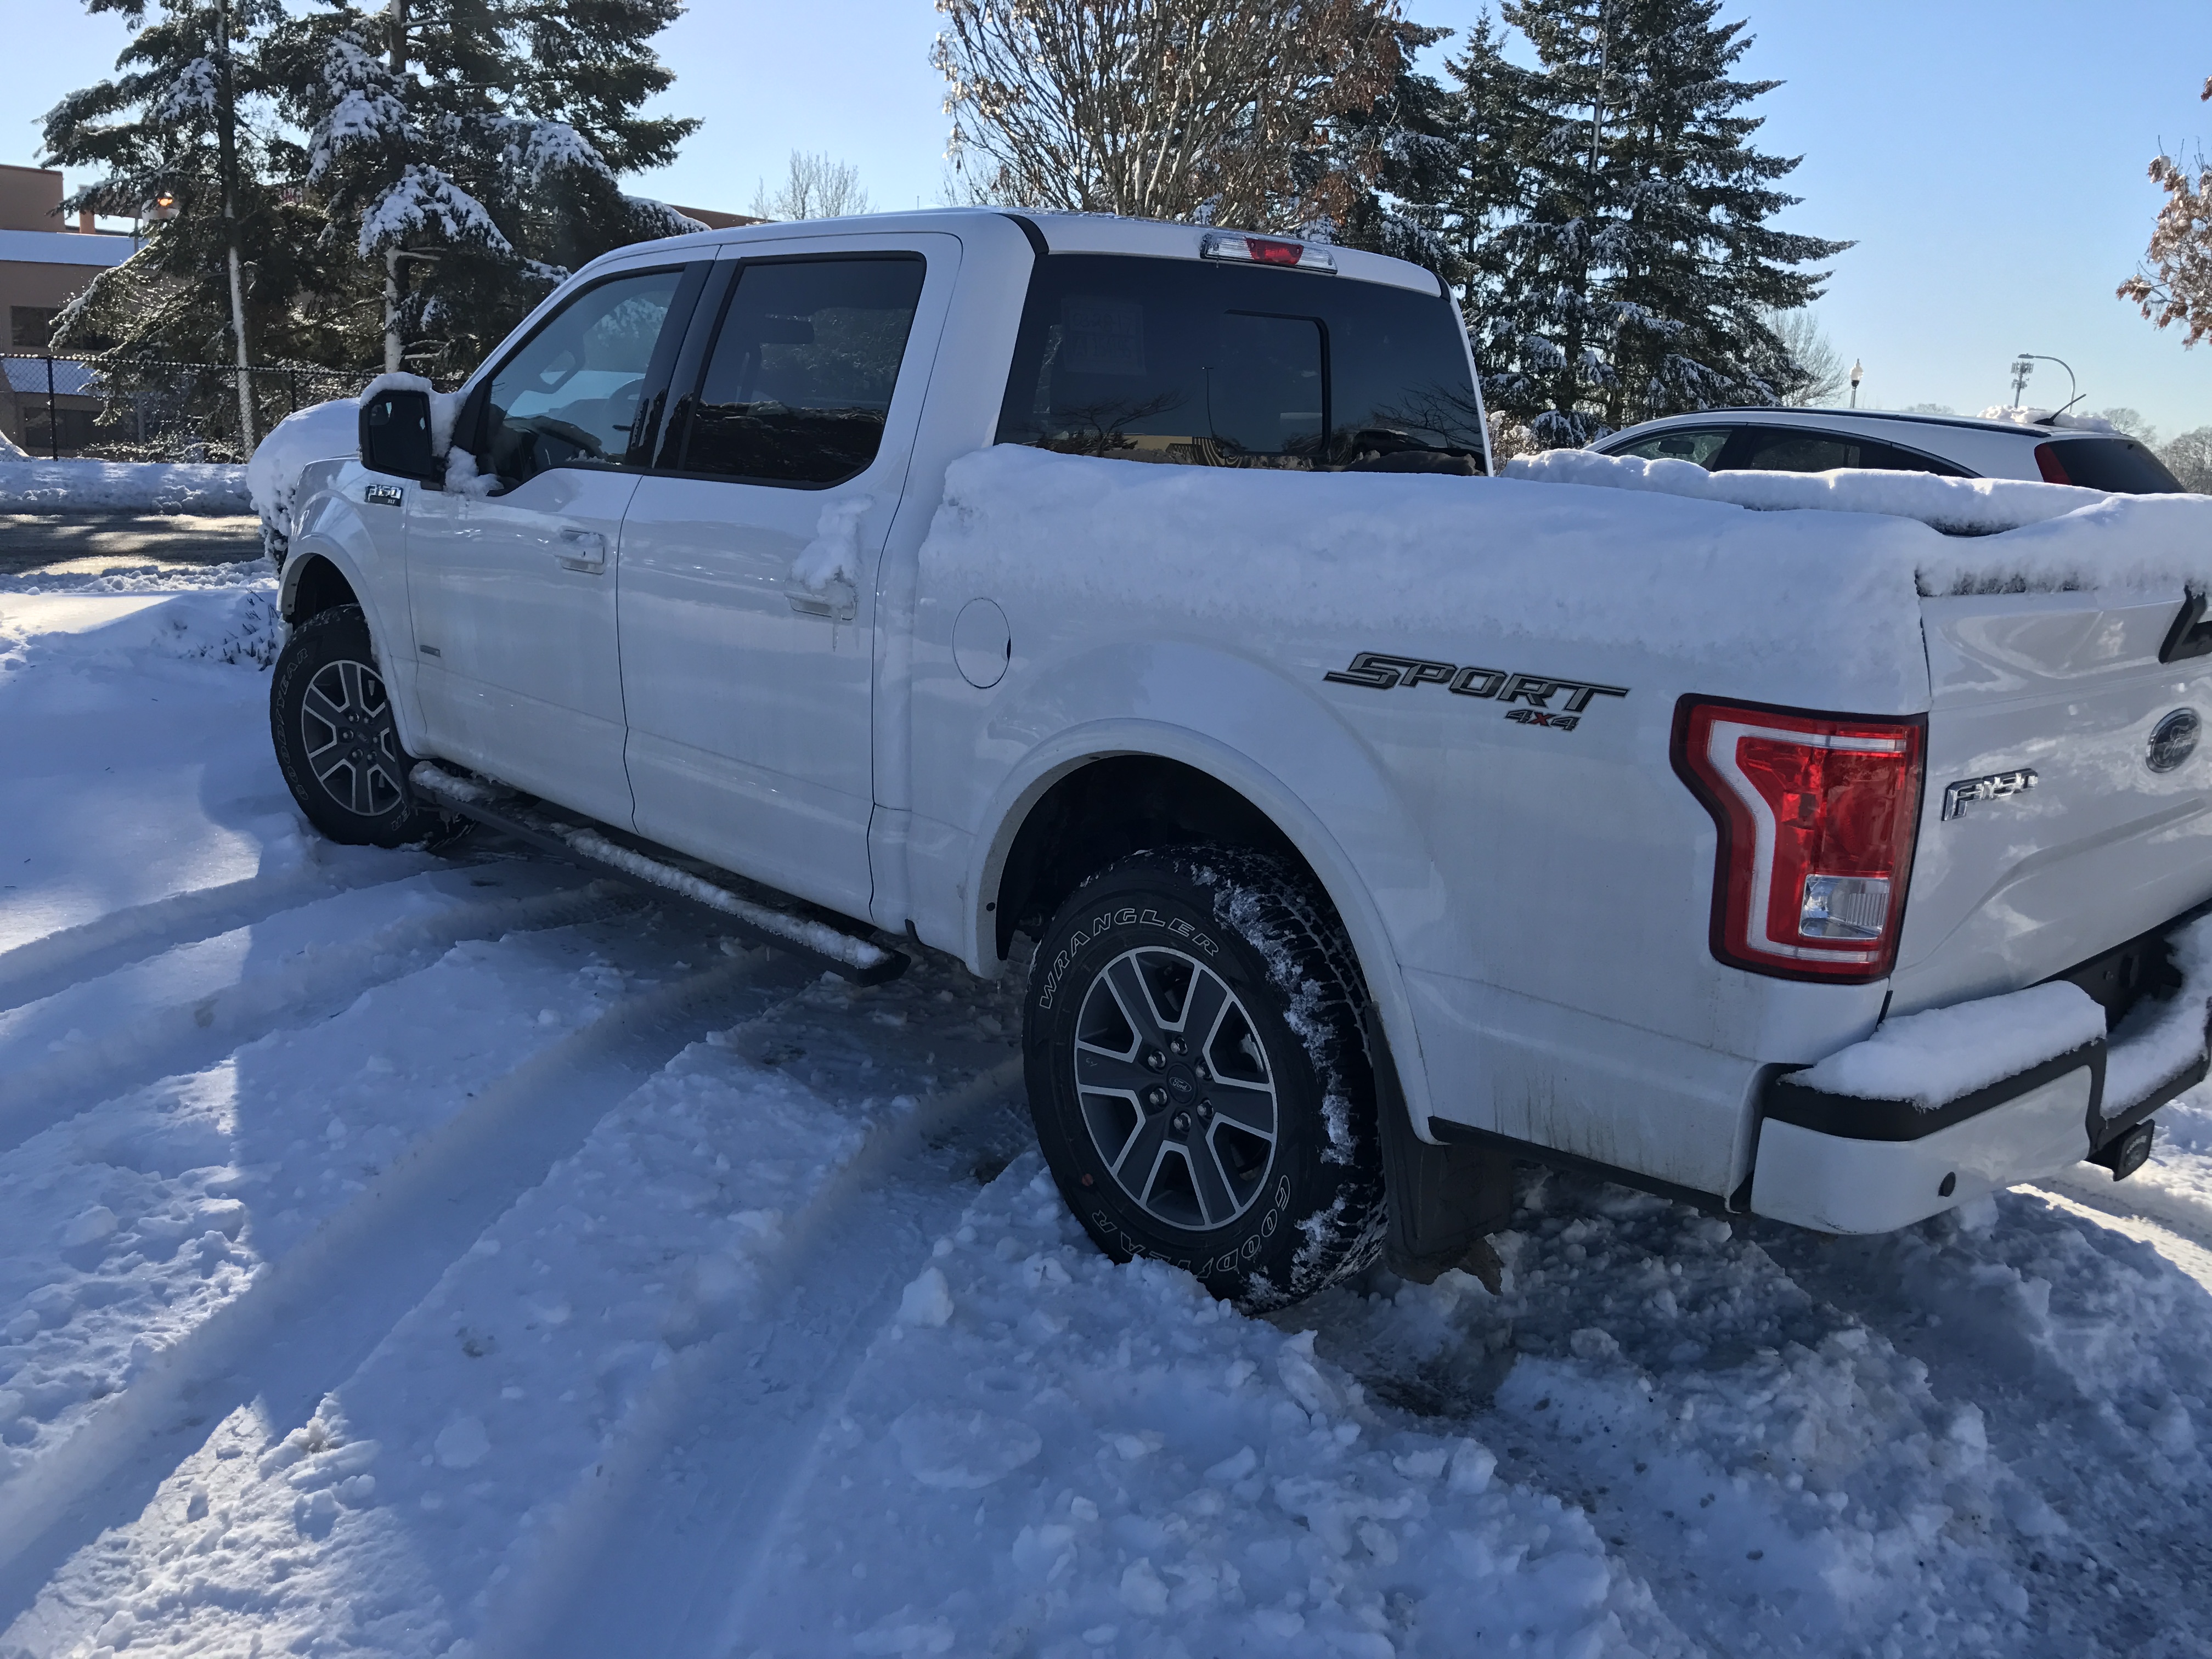 2016 F150 4x4 SuperCrew XLT 2.7 EcoBoost Build - Ford F150 Forum 2016 Ford F 150 2.7 Ecoboost Problems